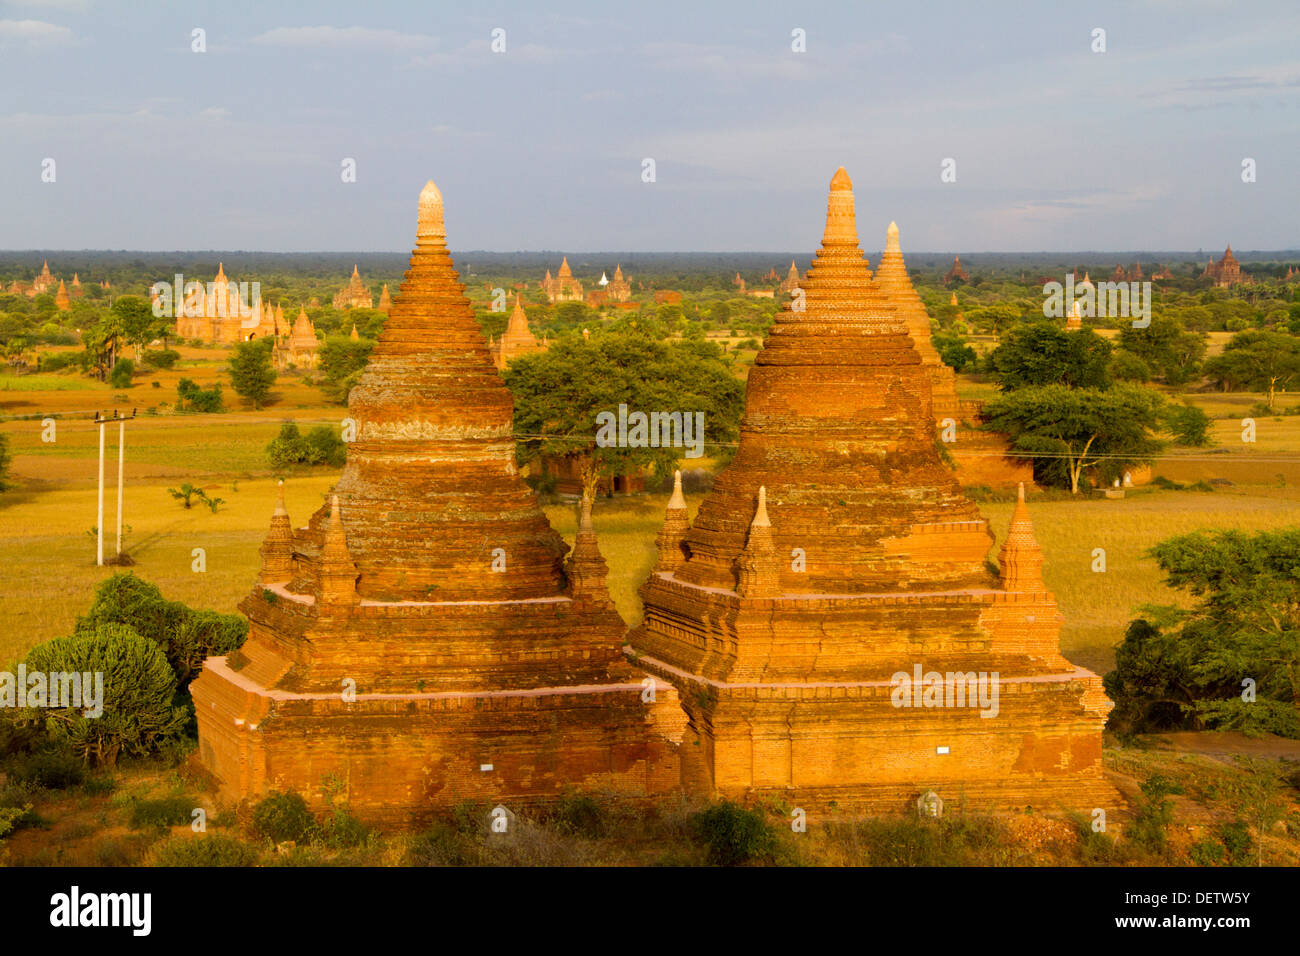 A view from Buledi Temple in the central plain of Bagan, Burma. Stock Photo